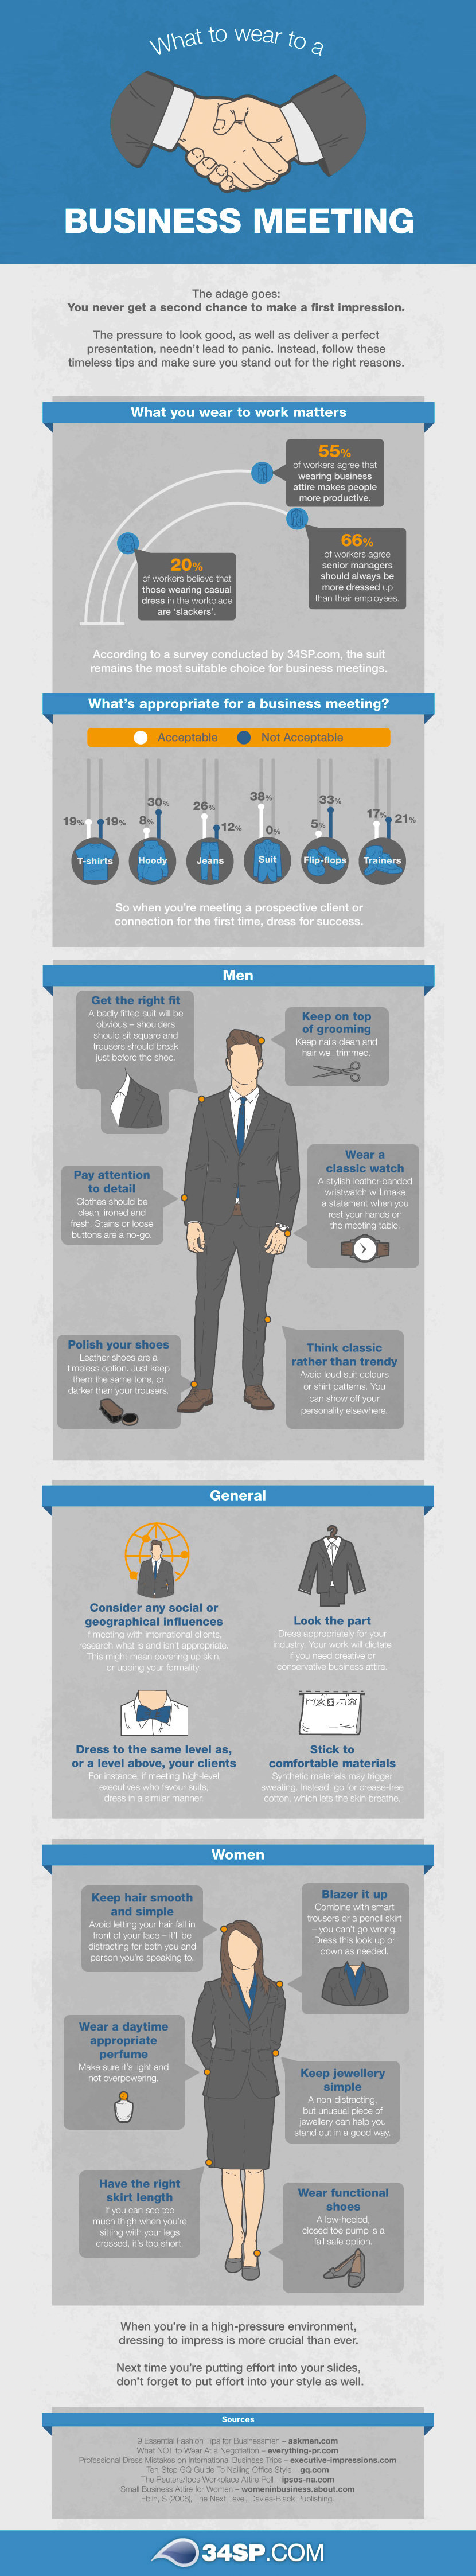 What to Wear to a Business Meeting job interview success tips tutorial